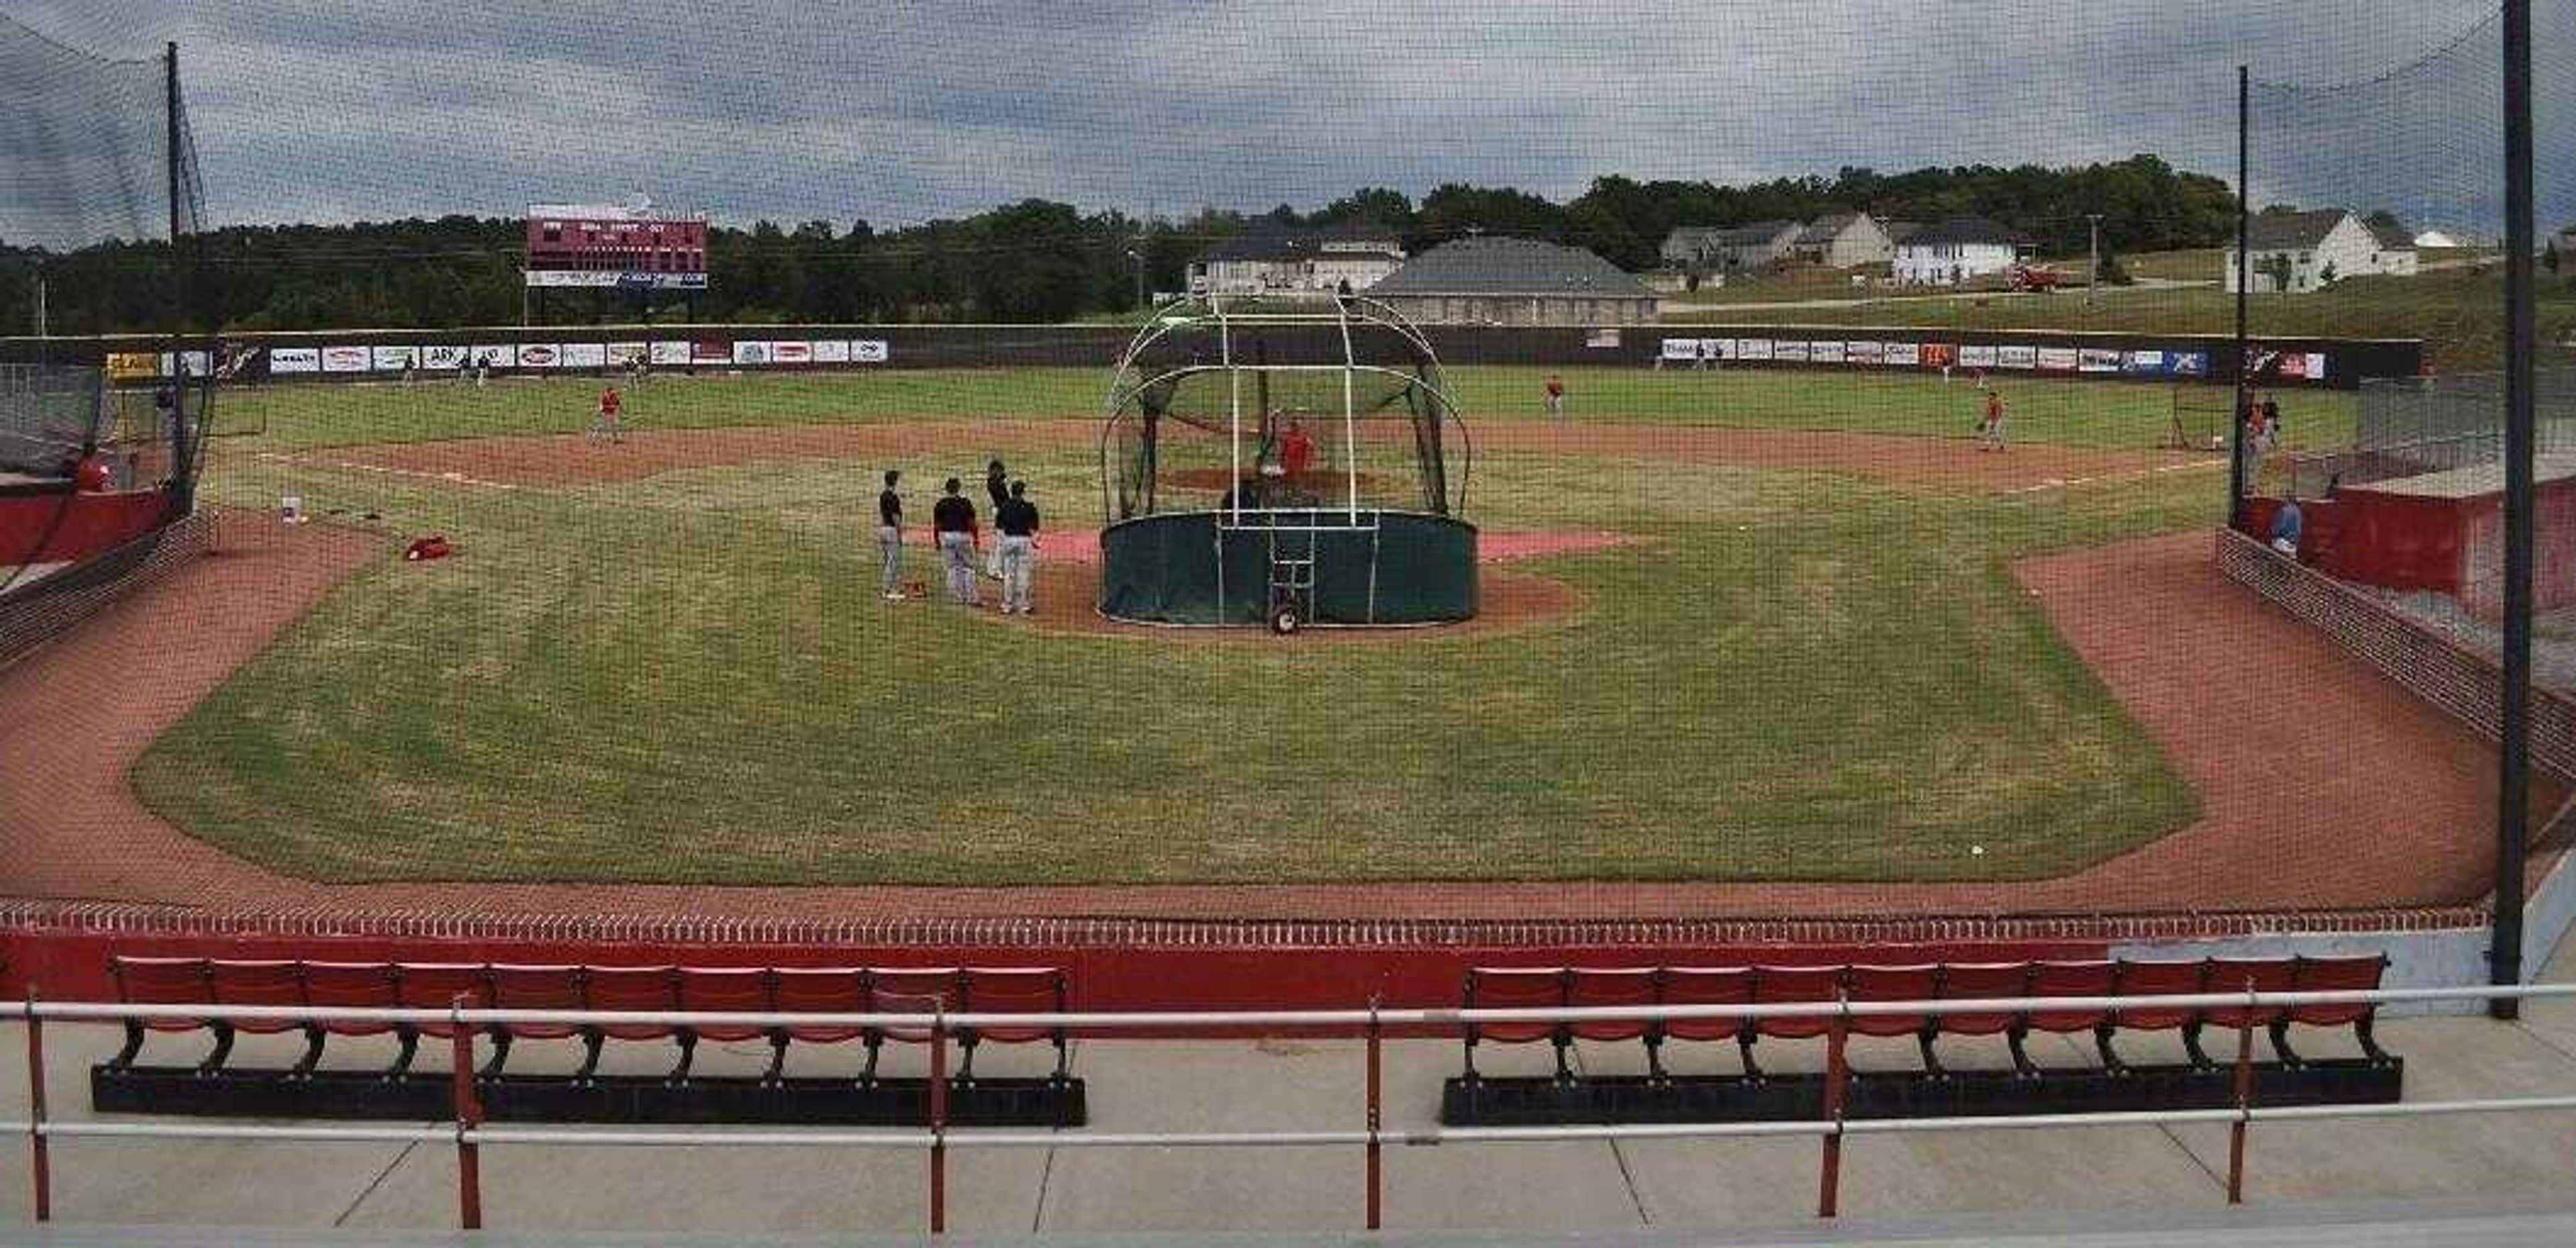 Southeast's baseball team practices at Whitey Herzog Field in Jackson due to Capaha Field going through renovations.